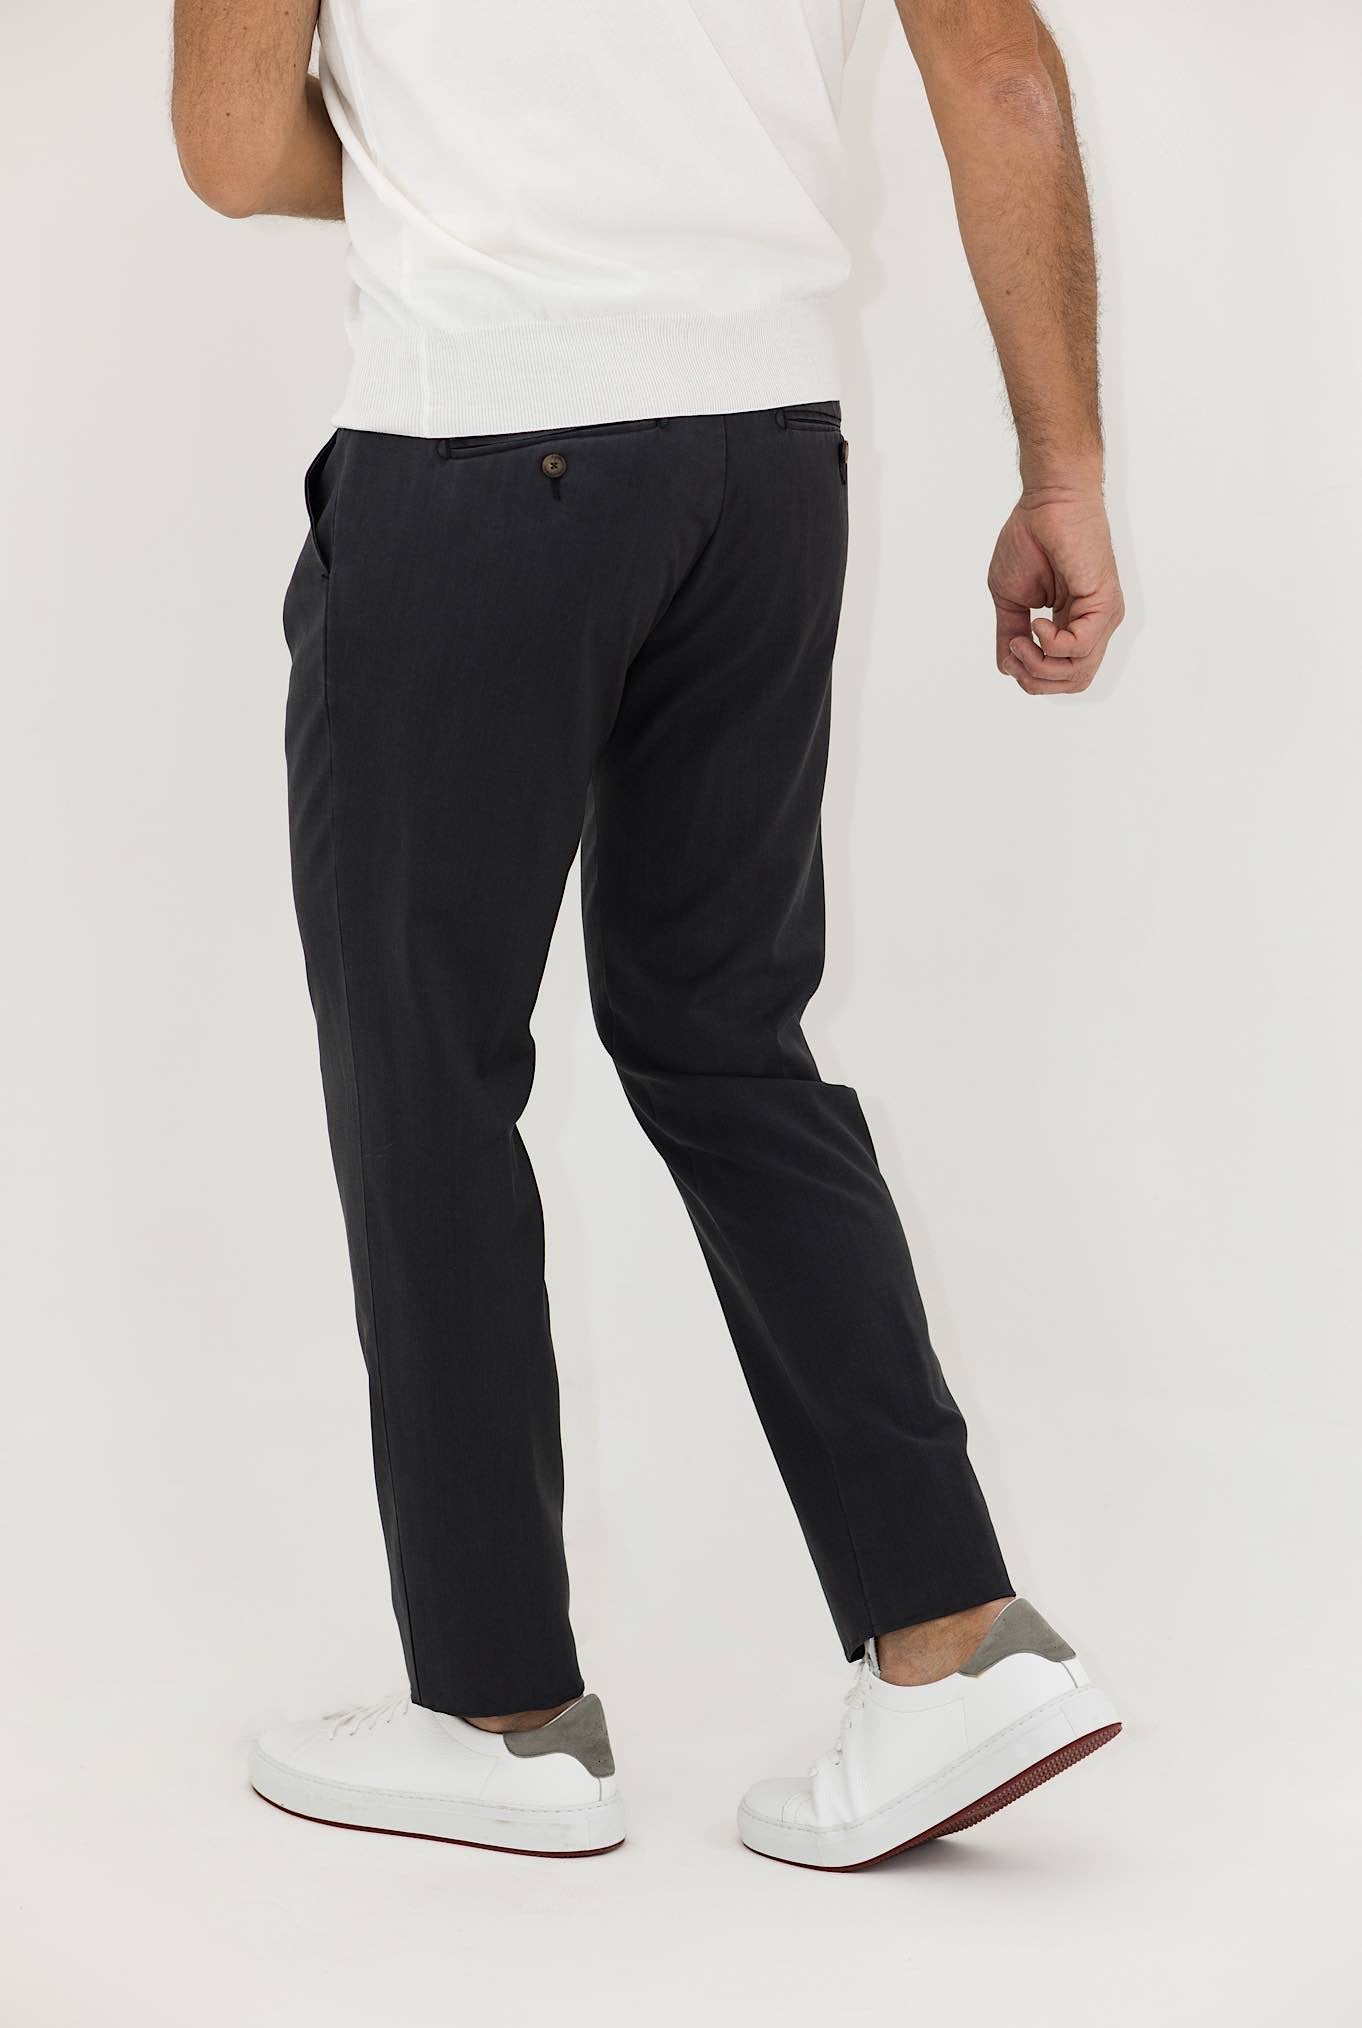 MYTHS Fresco Wool Trousers with Black Pleats